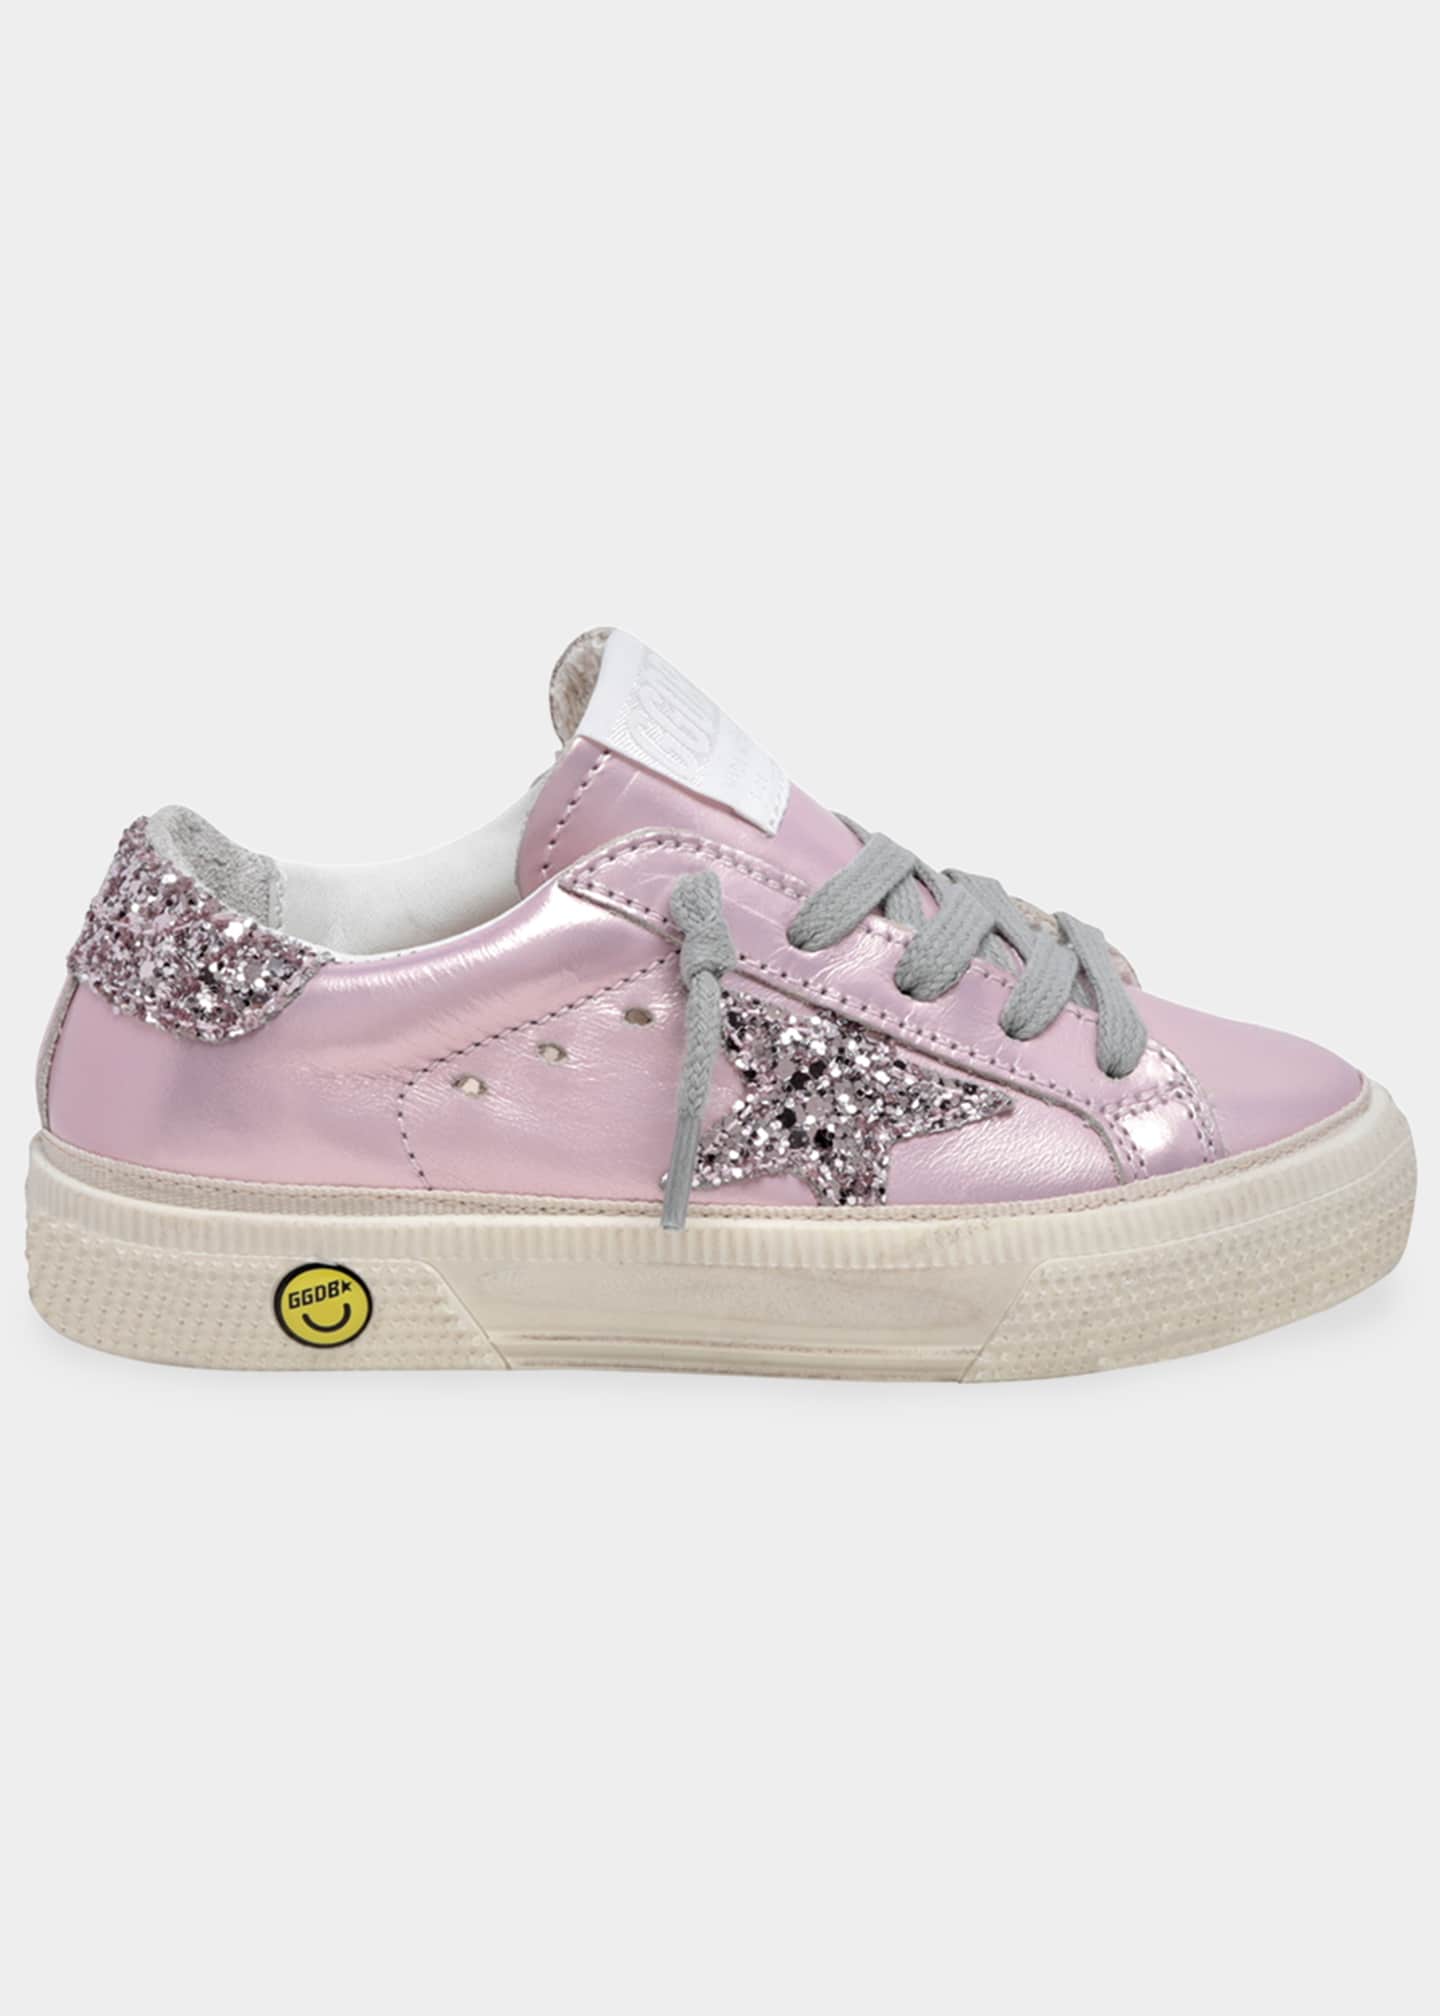 Golden Goose Girl's May Laminated Leather & Glitter Low-Top Sneakers ...